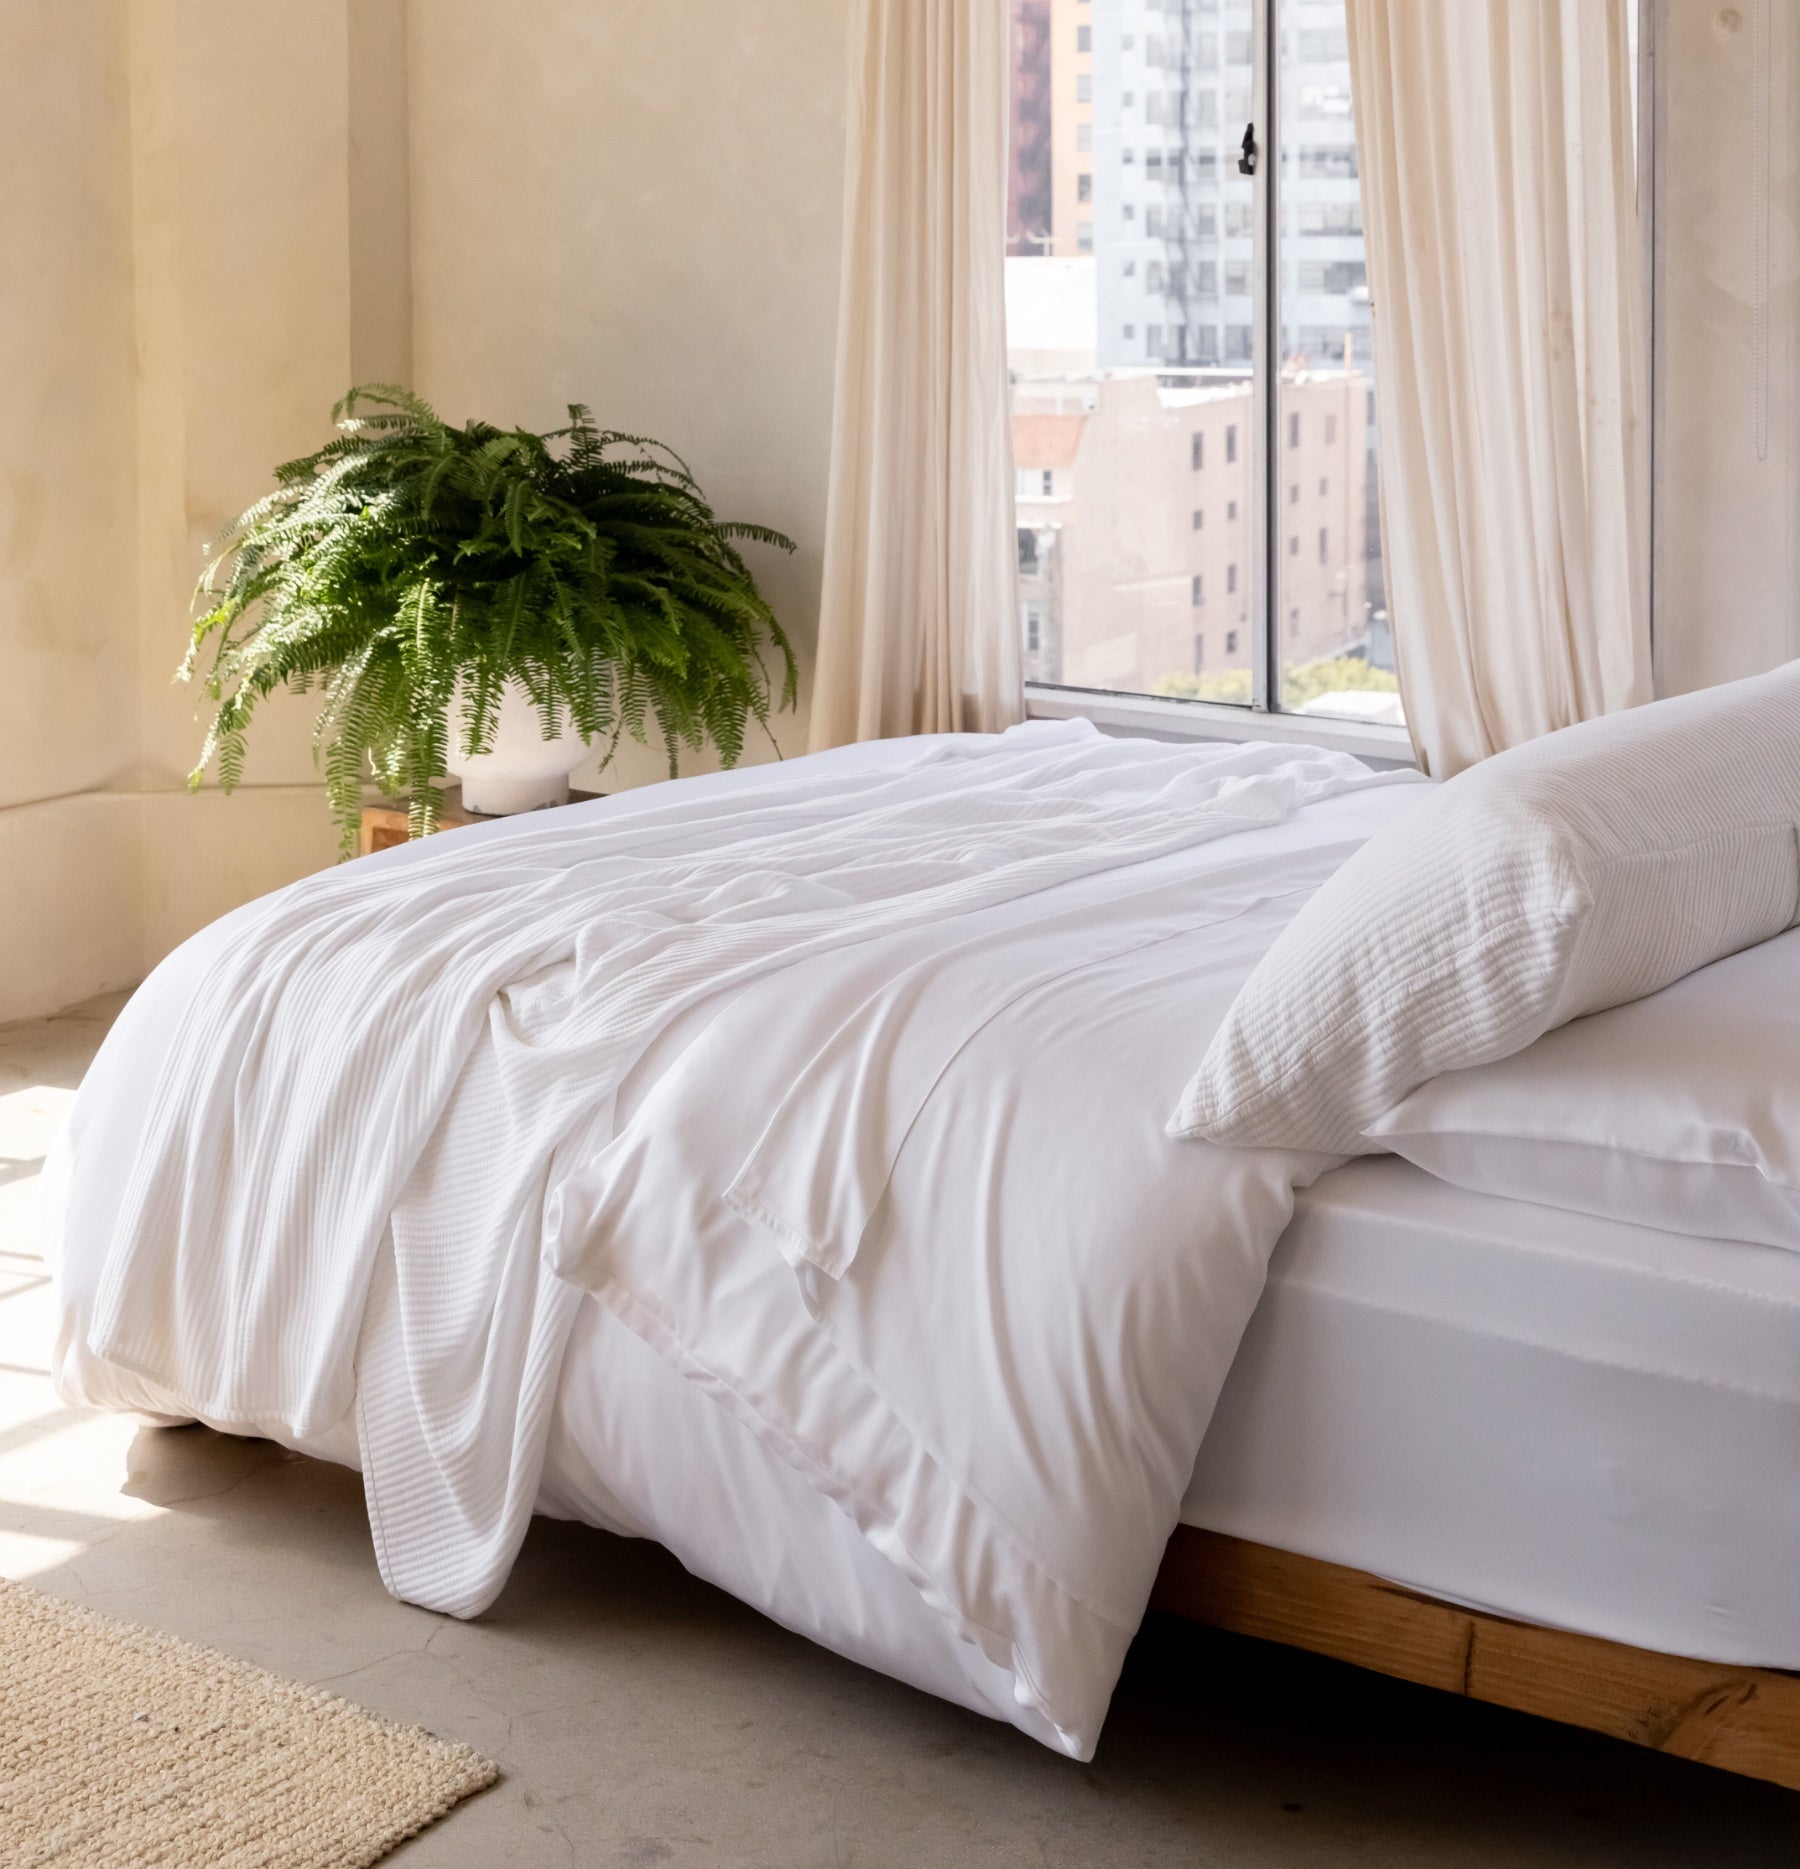 Bed with white bedding in a sunny room